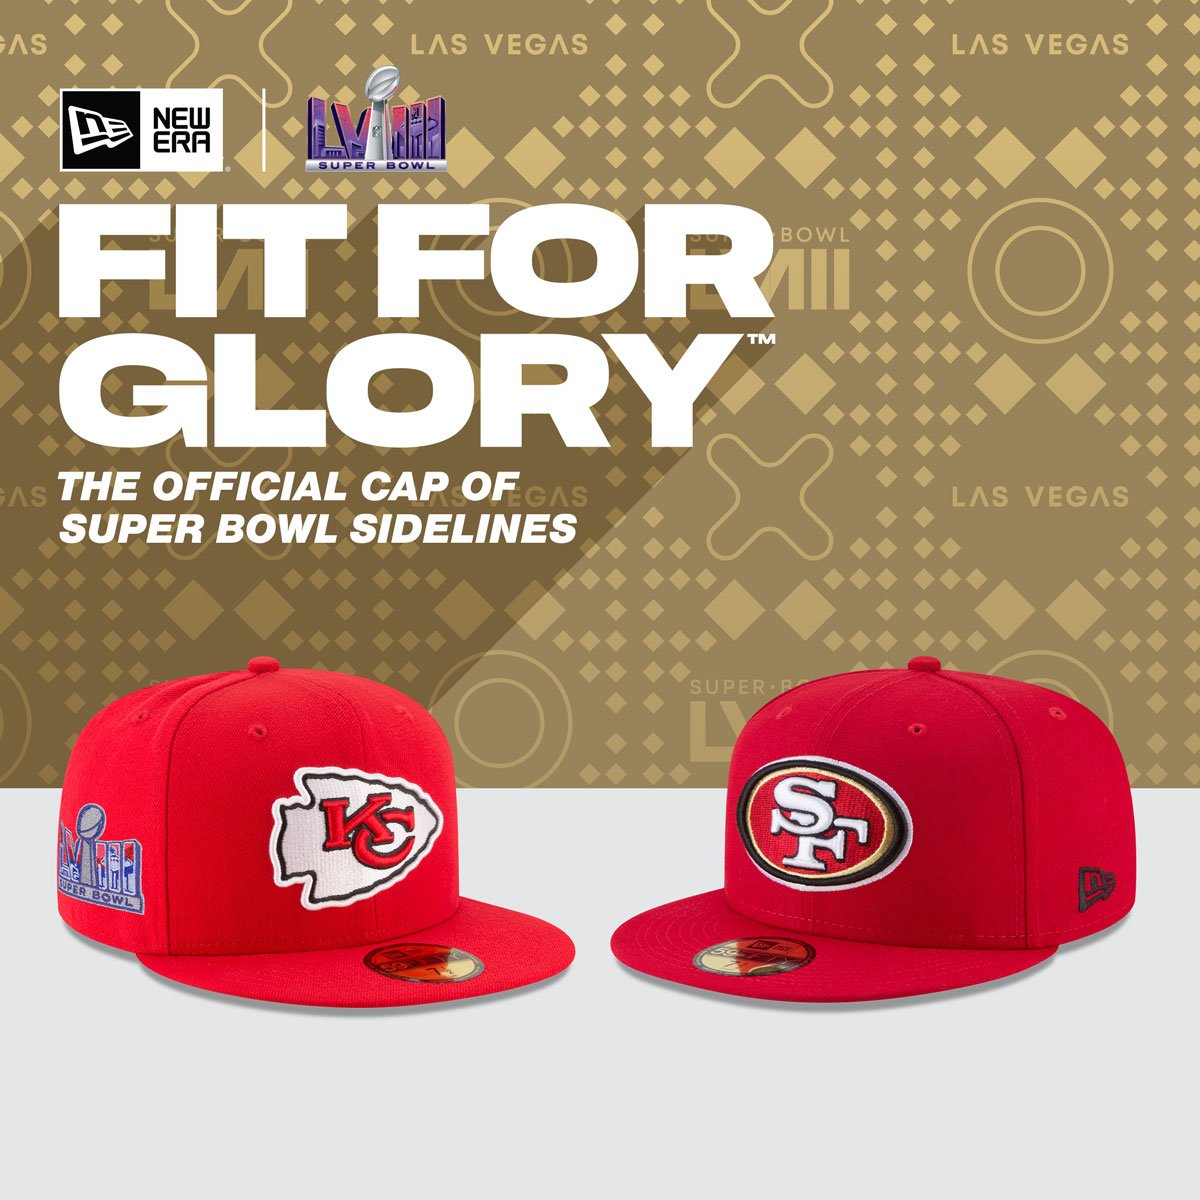 FIT FOR GLORY - The Official Cap of Super Bowl Sidelines